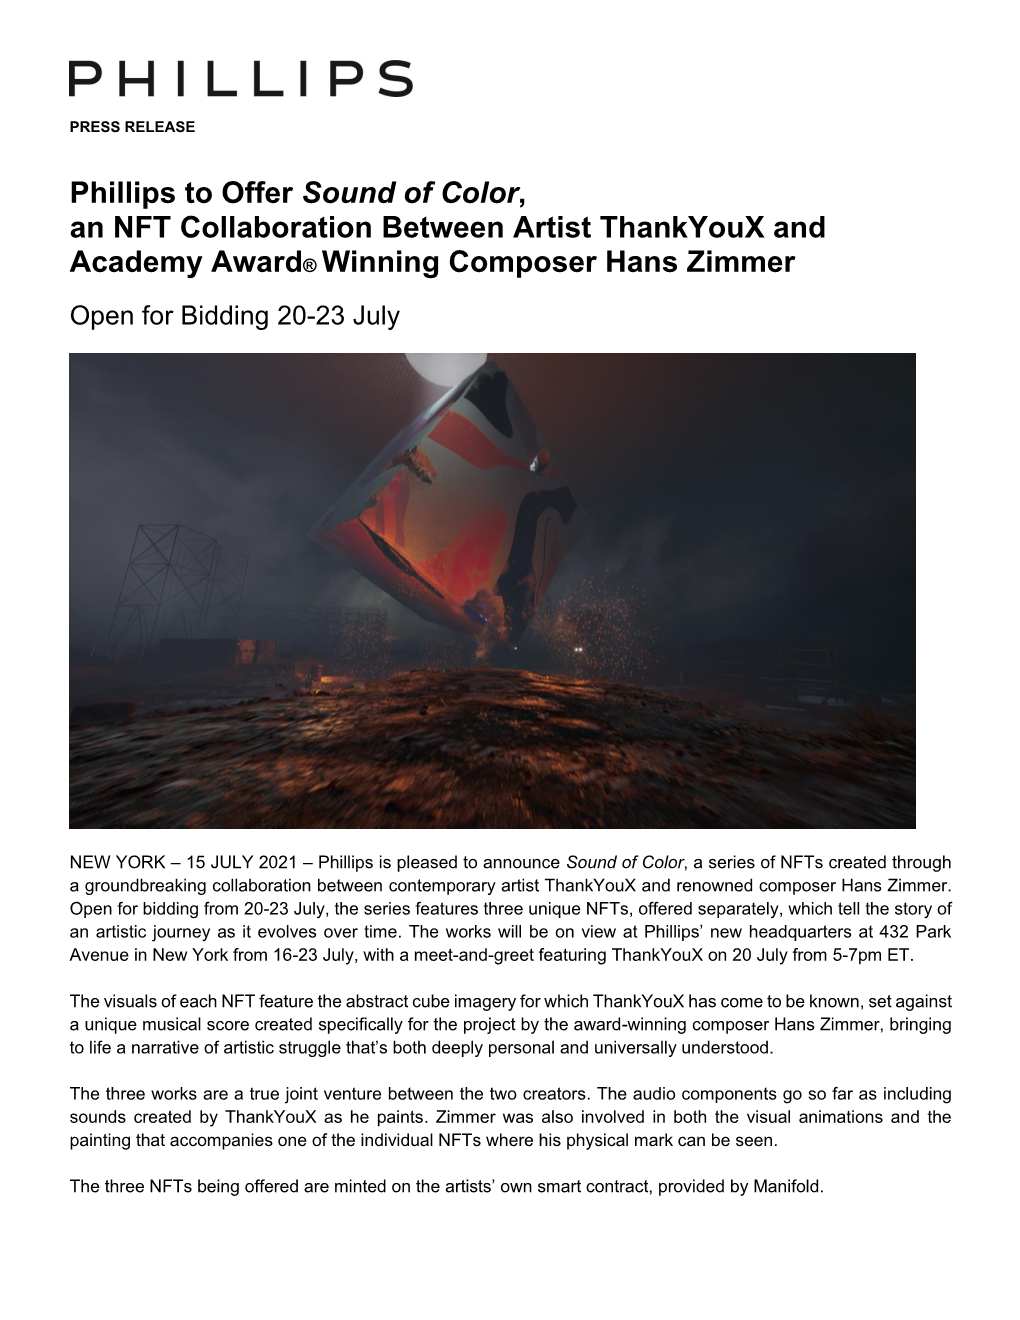 Phillips to Offer Sound of Color, an NFT Collaboration Between Artist Thankyoux and Academy Award® Winning Composer Hans Zimmer